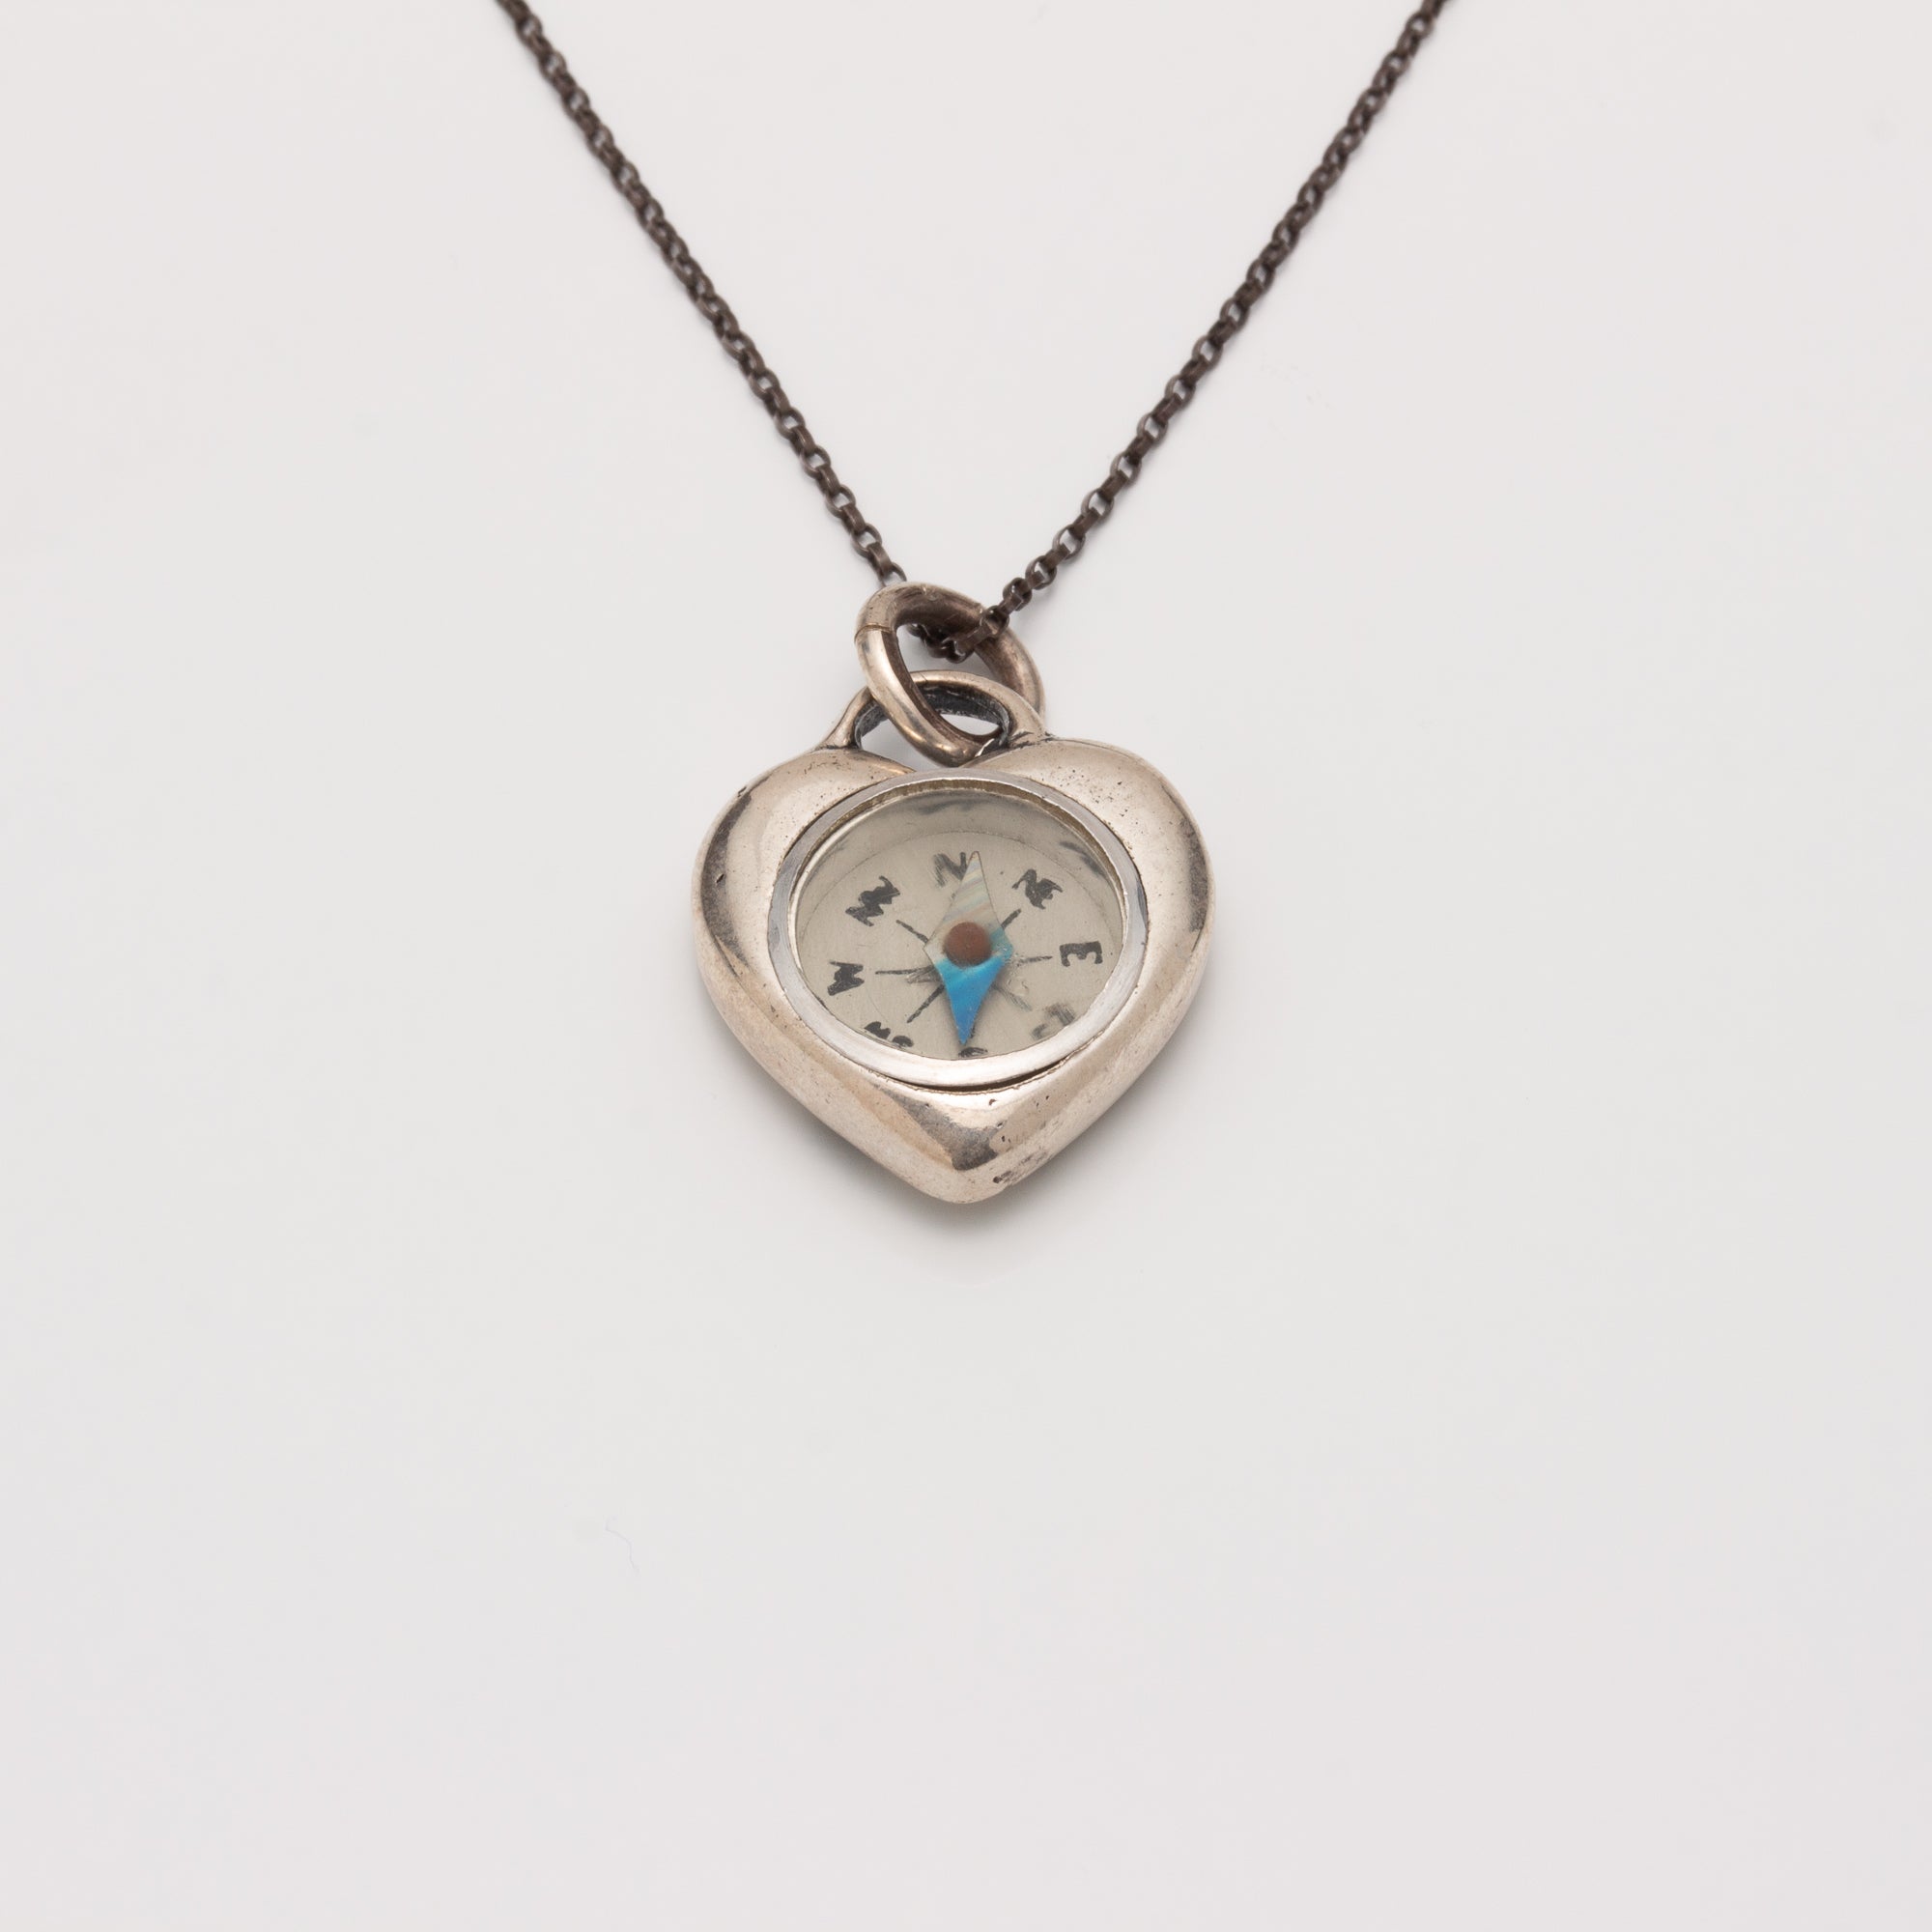 "MY HEART BELONGS IN TUCSON" // SILVER // COMPASS NECKLACE